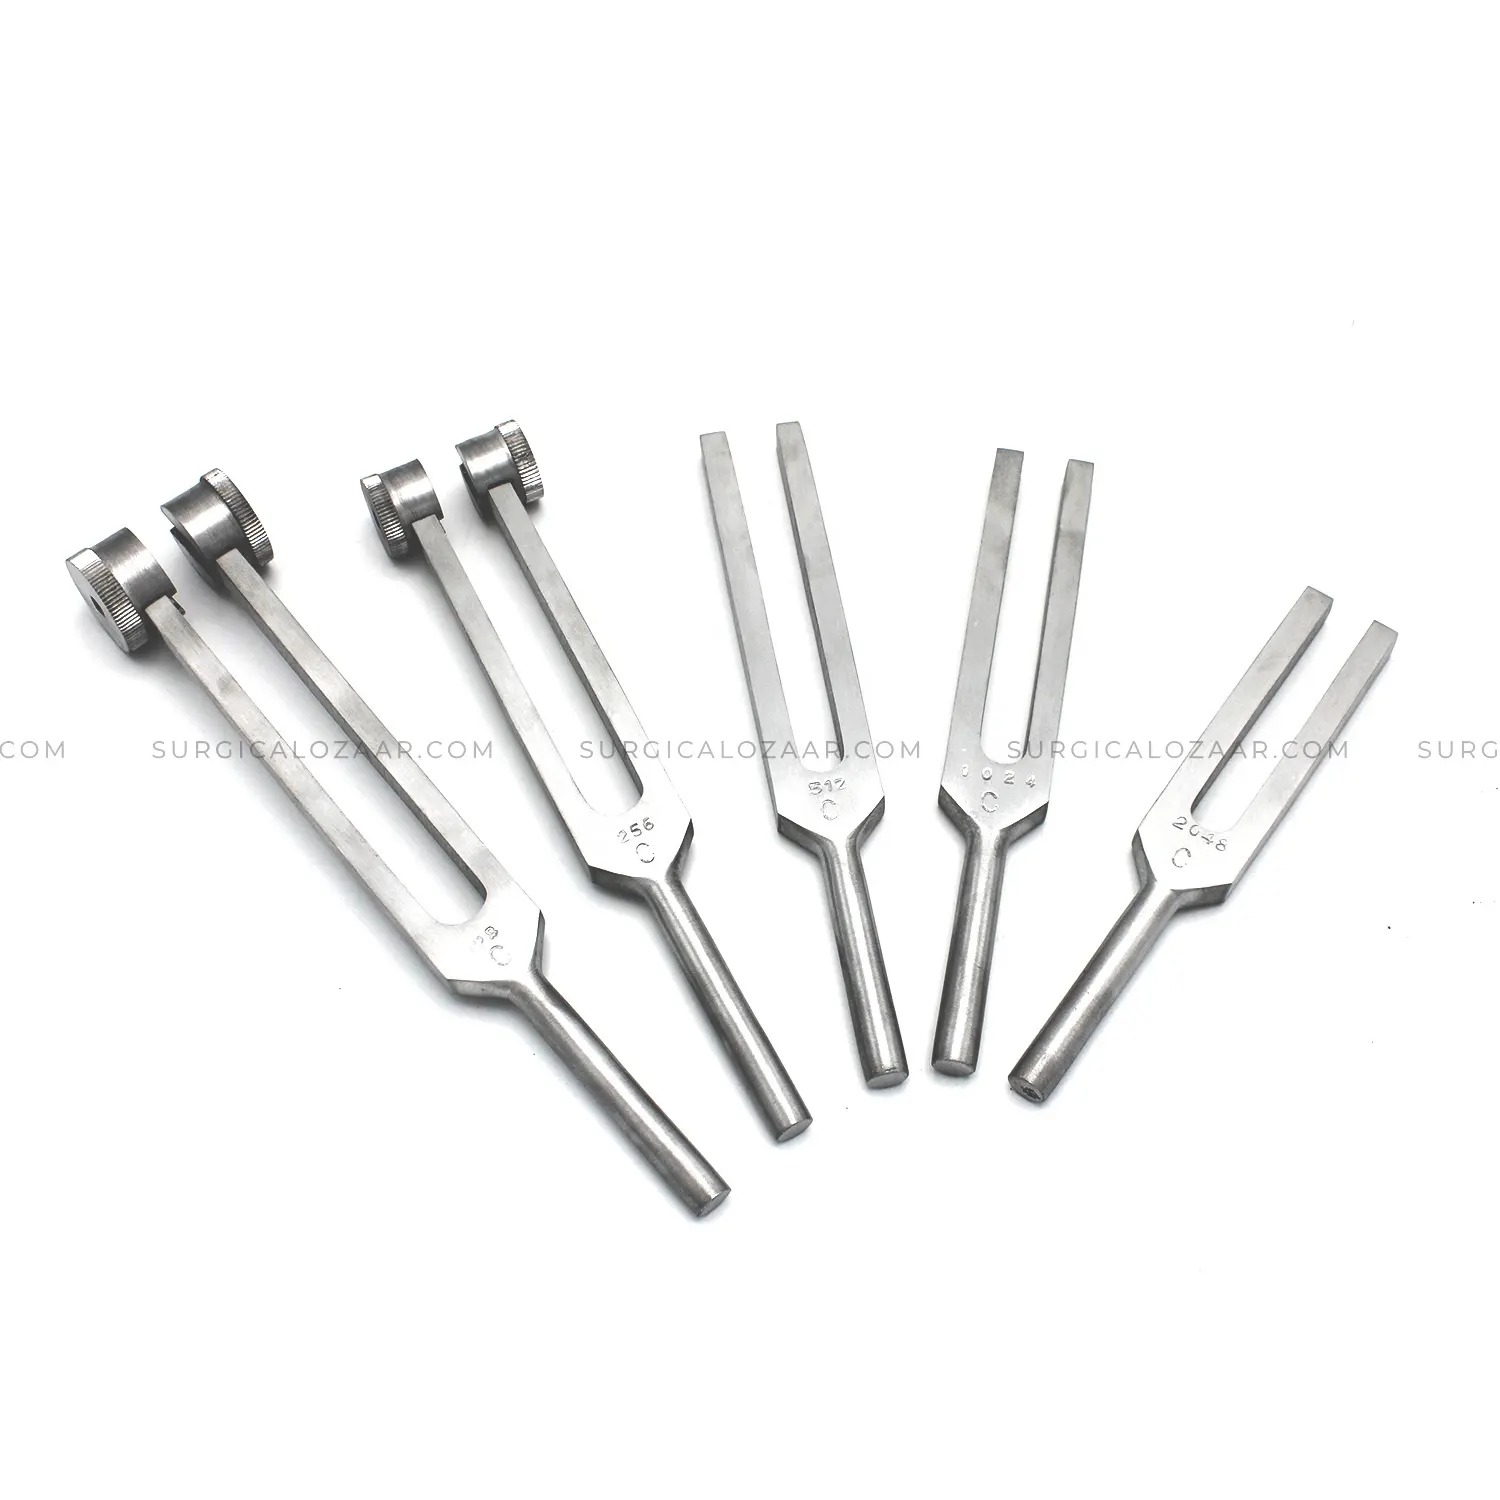 Tuner Kit Of Sound Healing Tuning Forks 5 Pieces Premium Quality with German Stainless Steel material by Surgical Ozaar